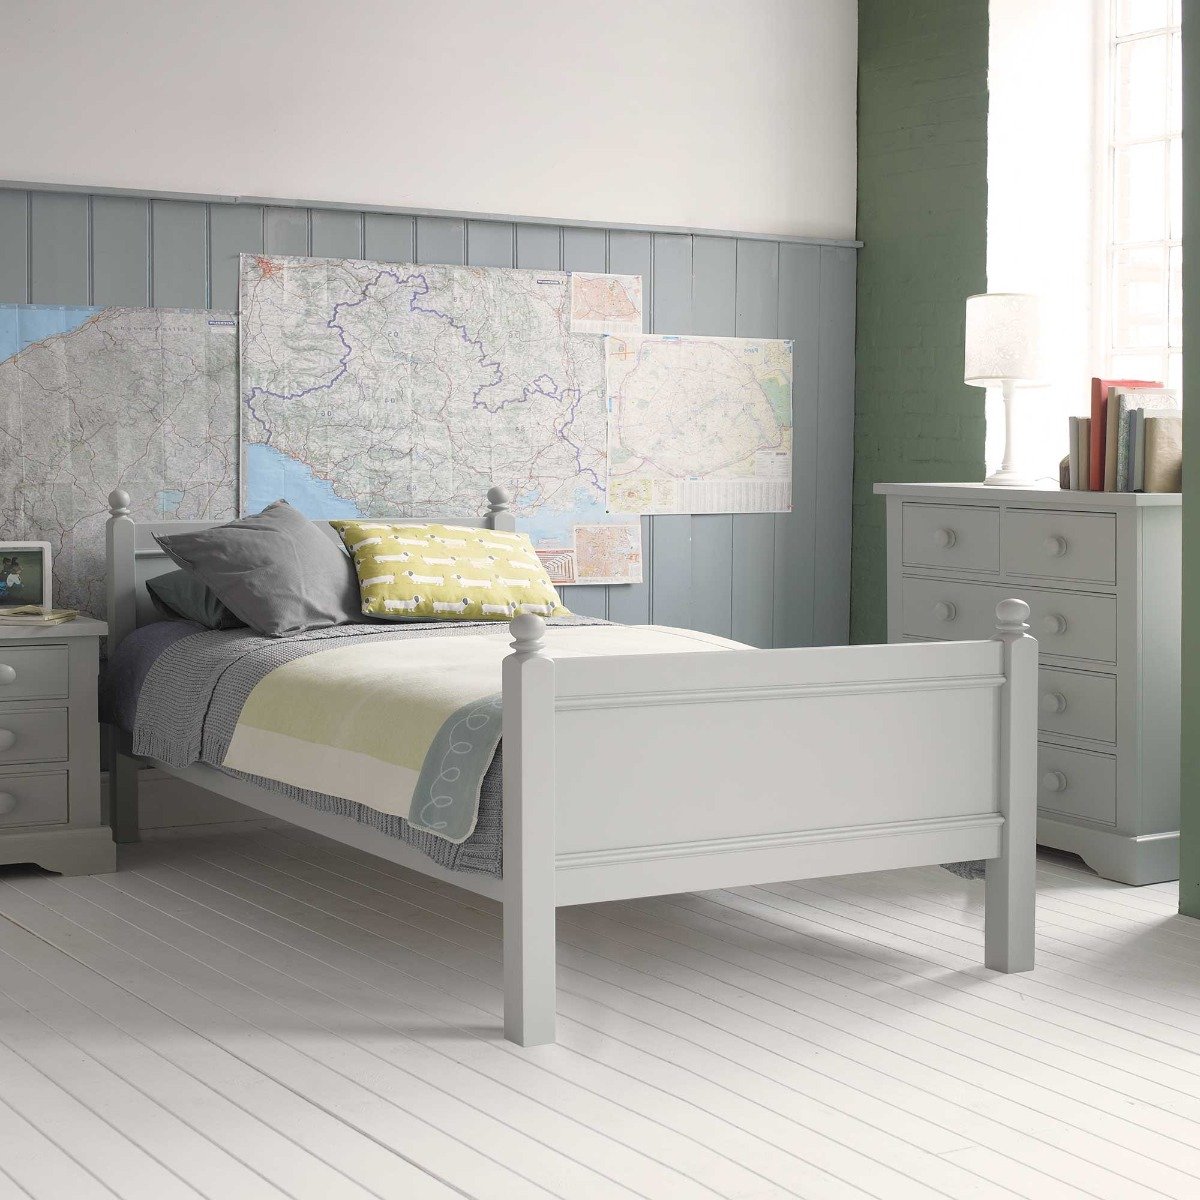 Pippin Small Double Bed, Grey | Barker & Stonehouse